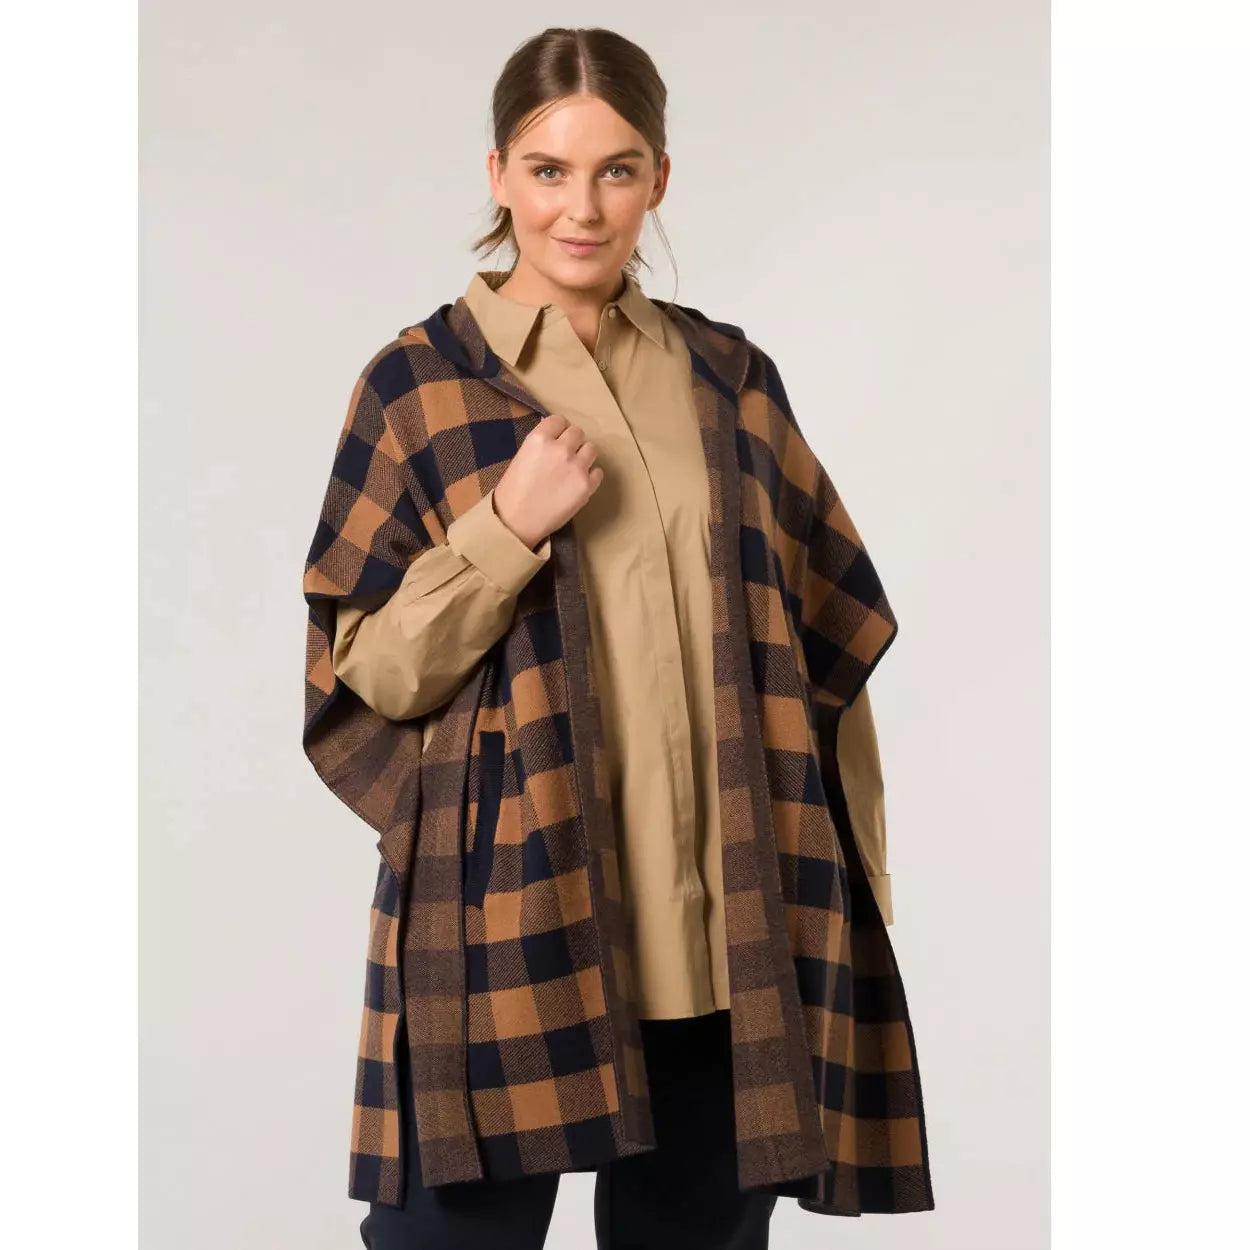 Fall Style Plaid -Hooded Coverup/Cardigan Plus size